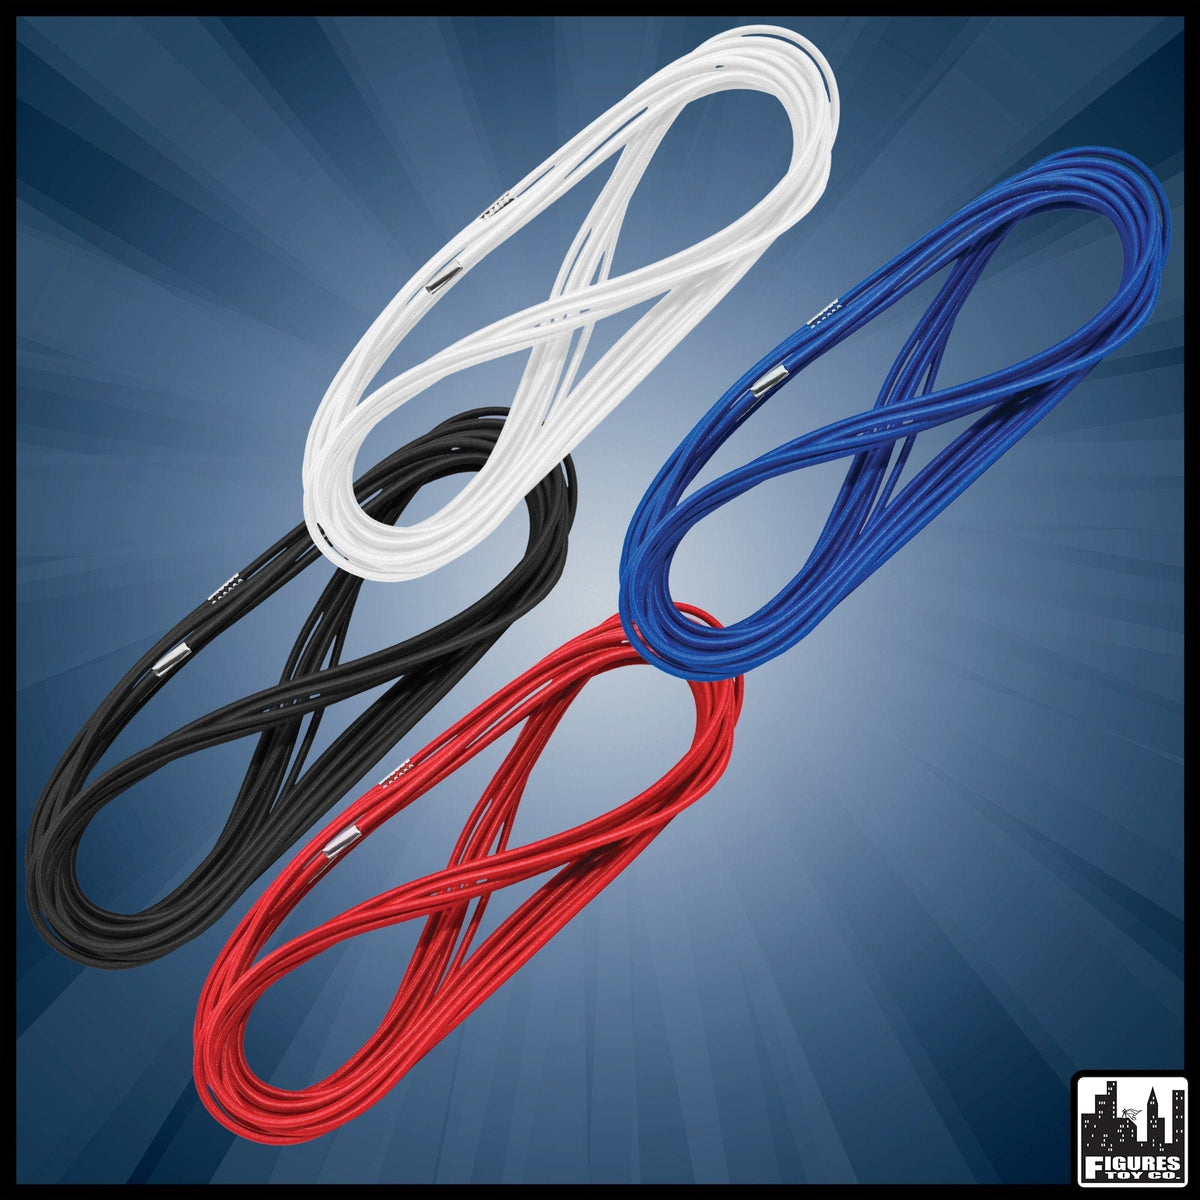 4 Sets of Colored Ring Ropes for LARGE Wrestling Action Figure Rings by Figures Toy Company